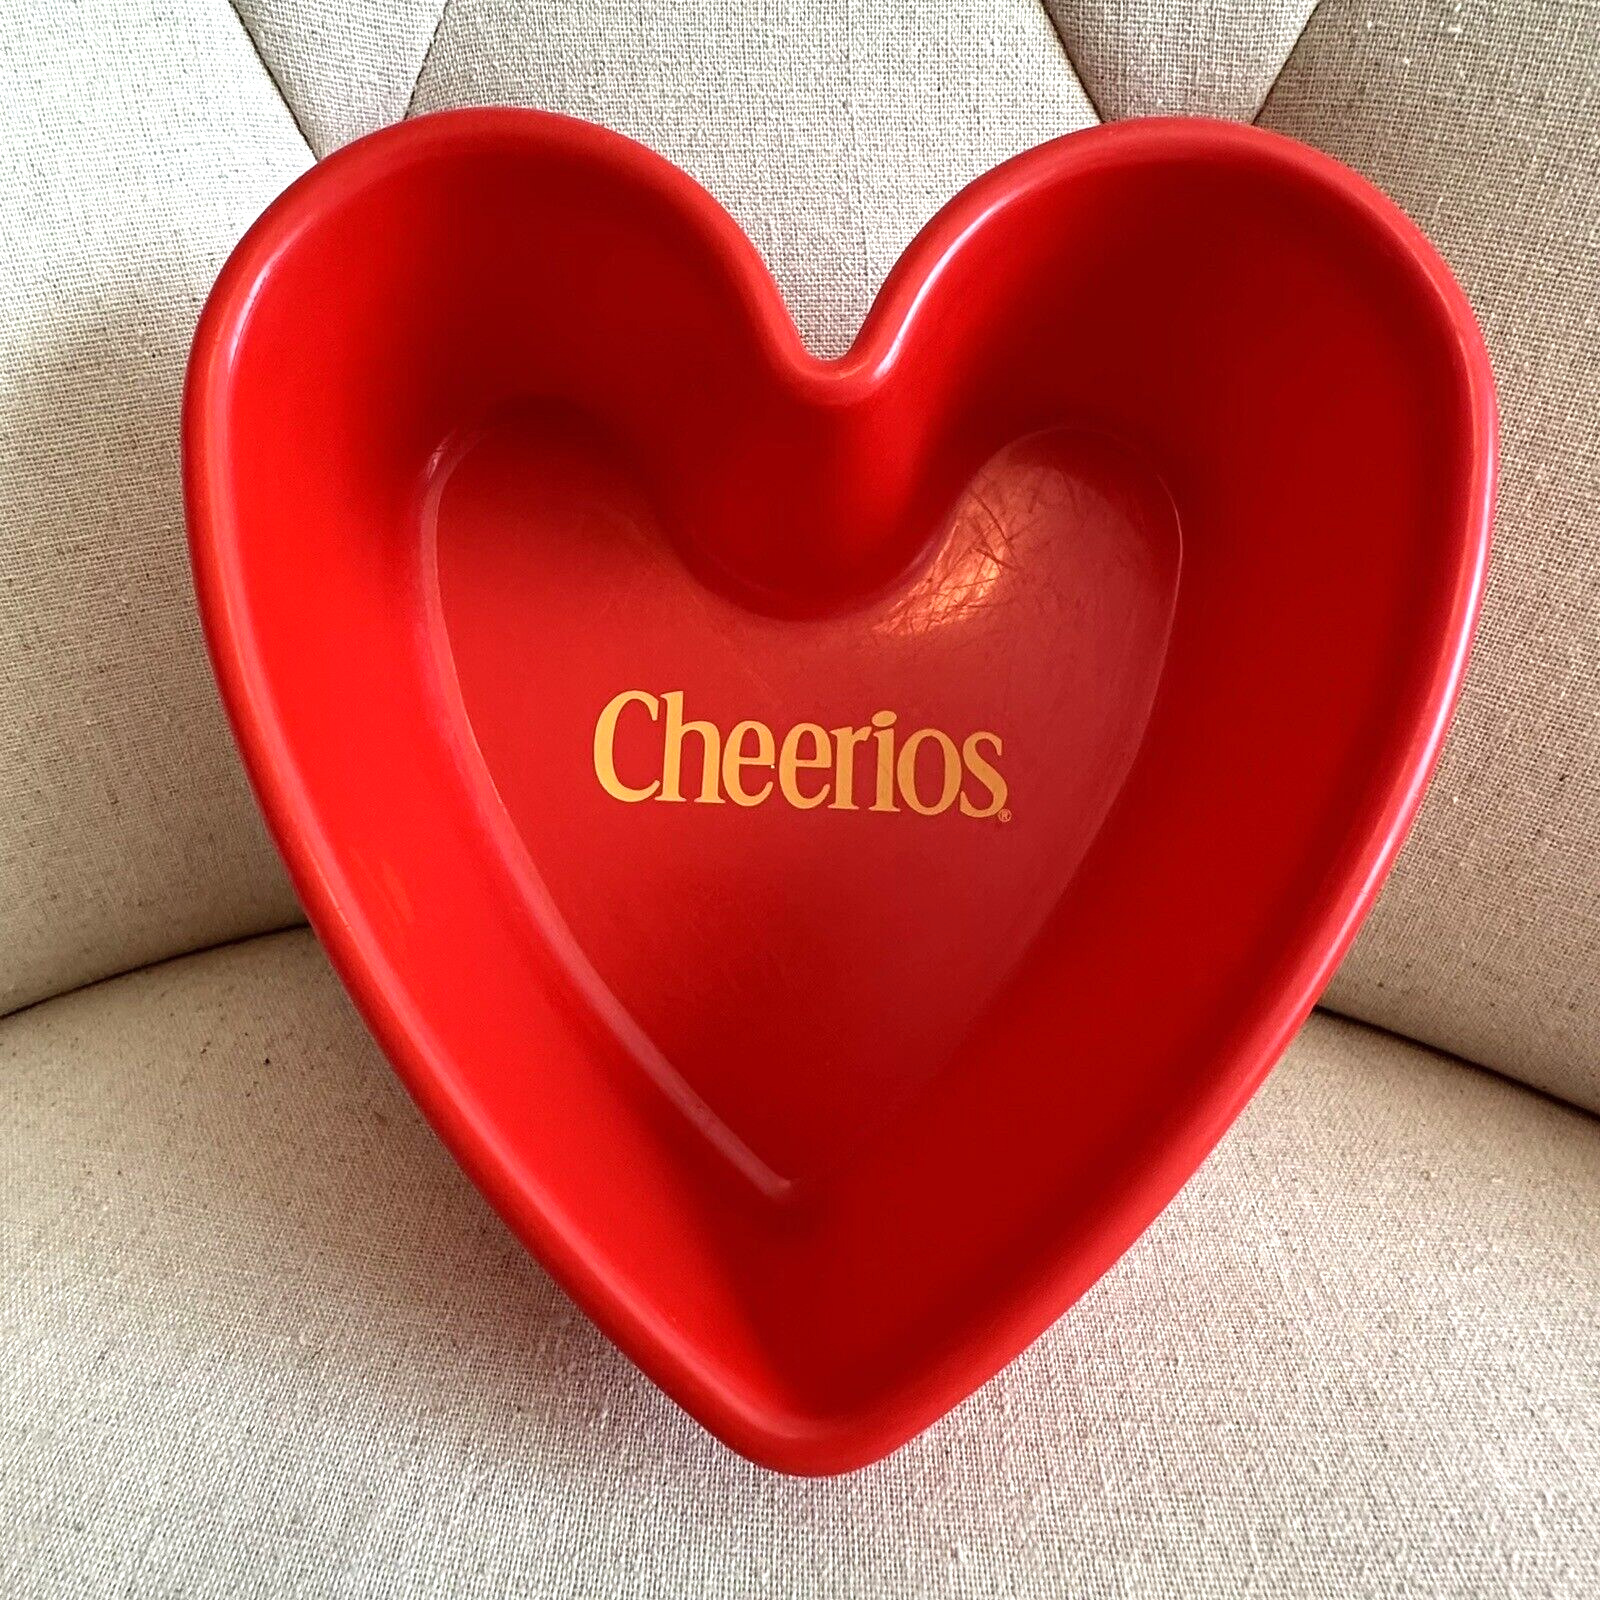 Vintage 2001 Cheerios Red Heart Bowl General Mills Cereal Plastic Shaped Yellow